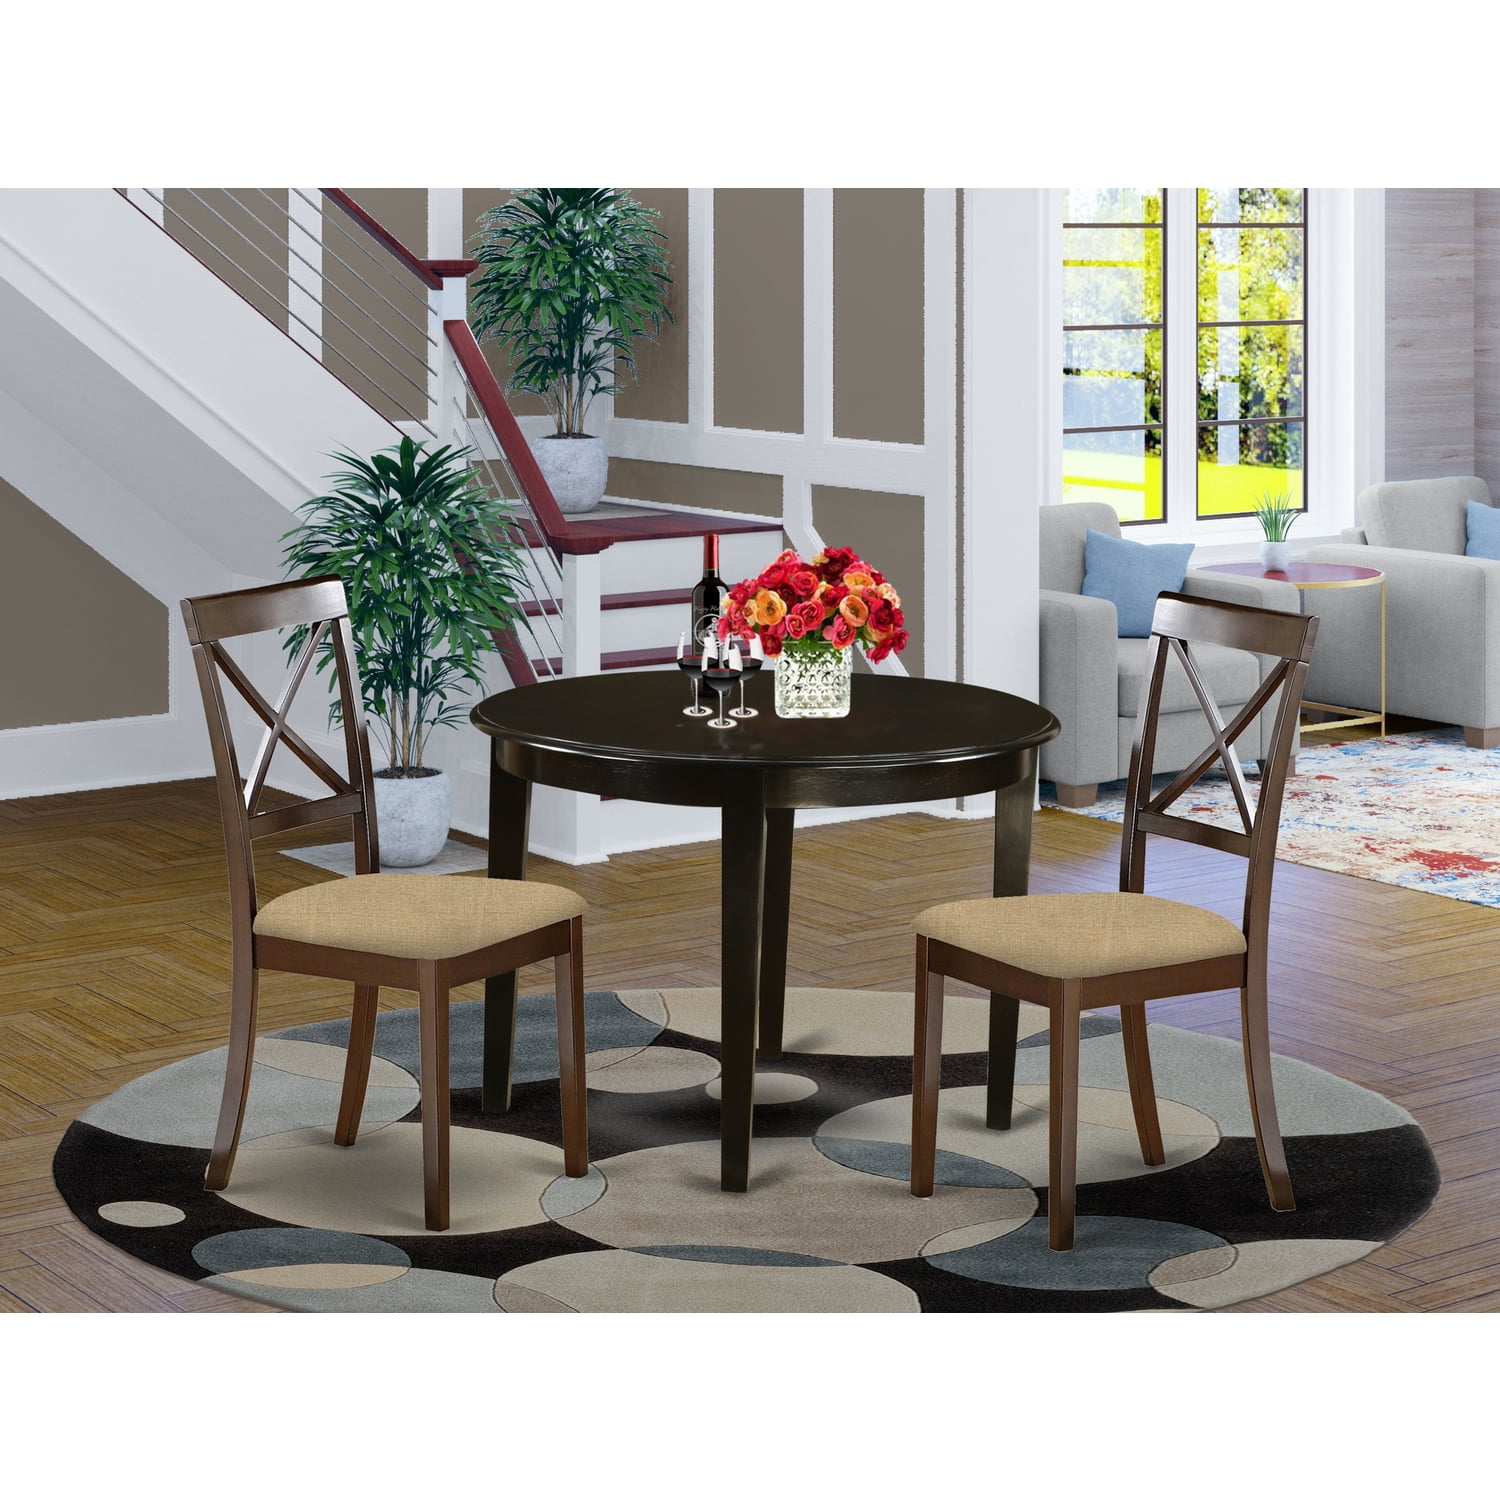 Bost3 Cap C 3 Pc Small Kitchen Table Set Round Table And 2 Dining Chairs Walmartcom Walmartcom